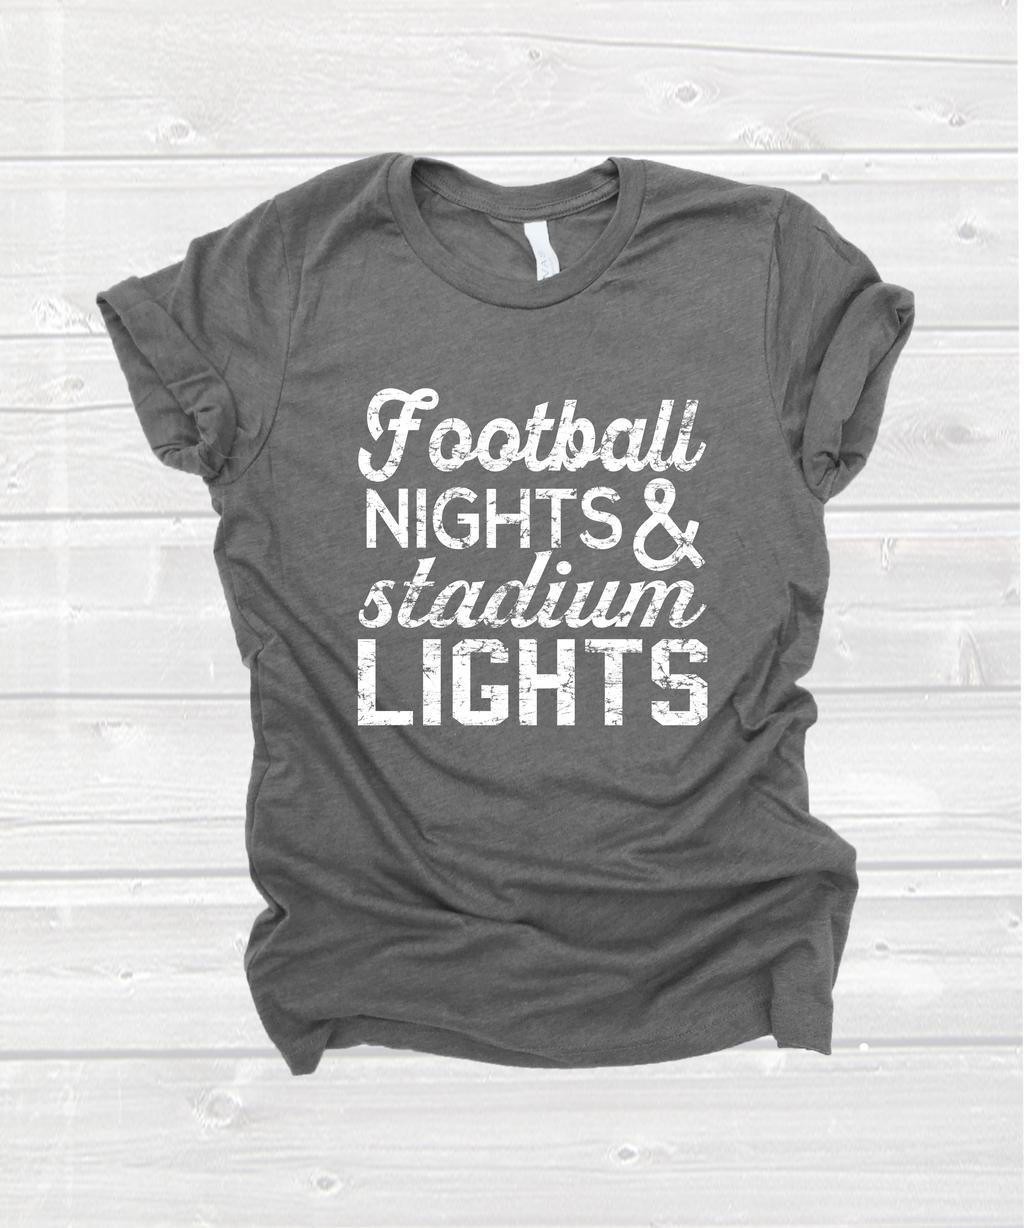 "football nights and stadium lights" tee in red, navy or grey